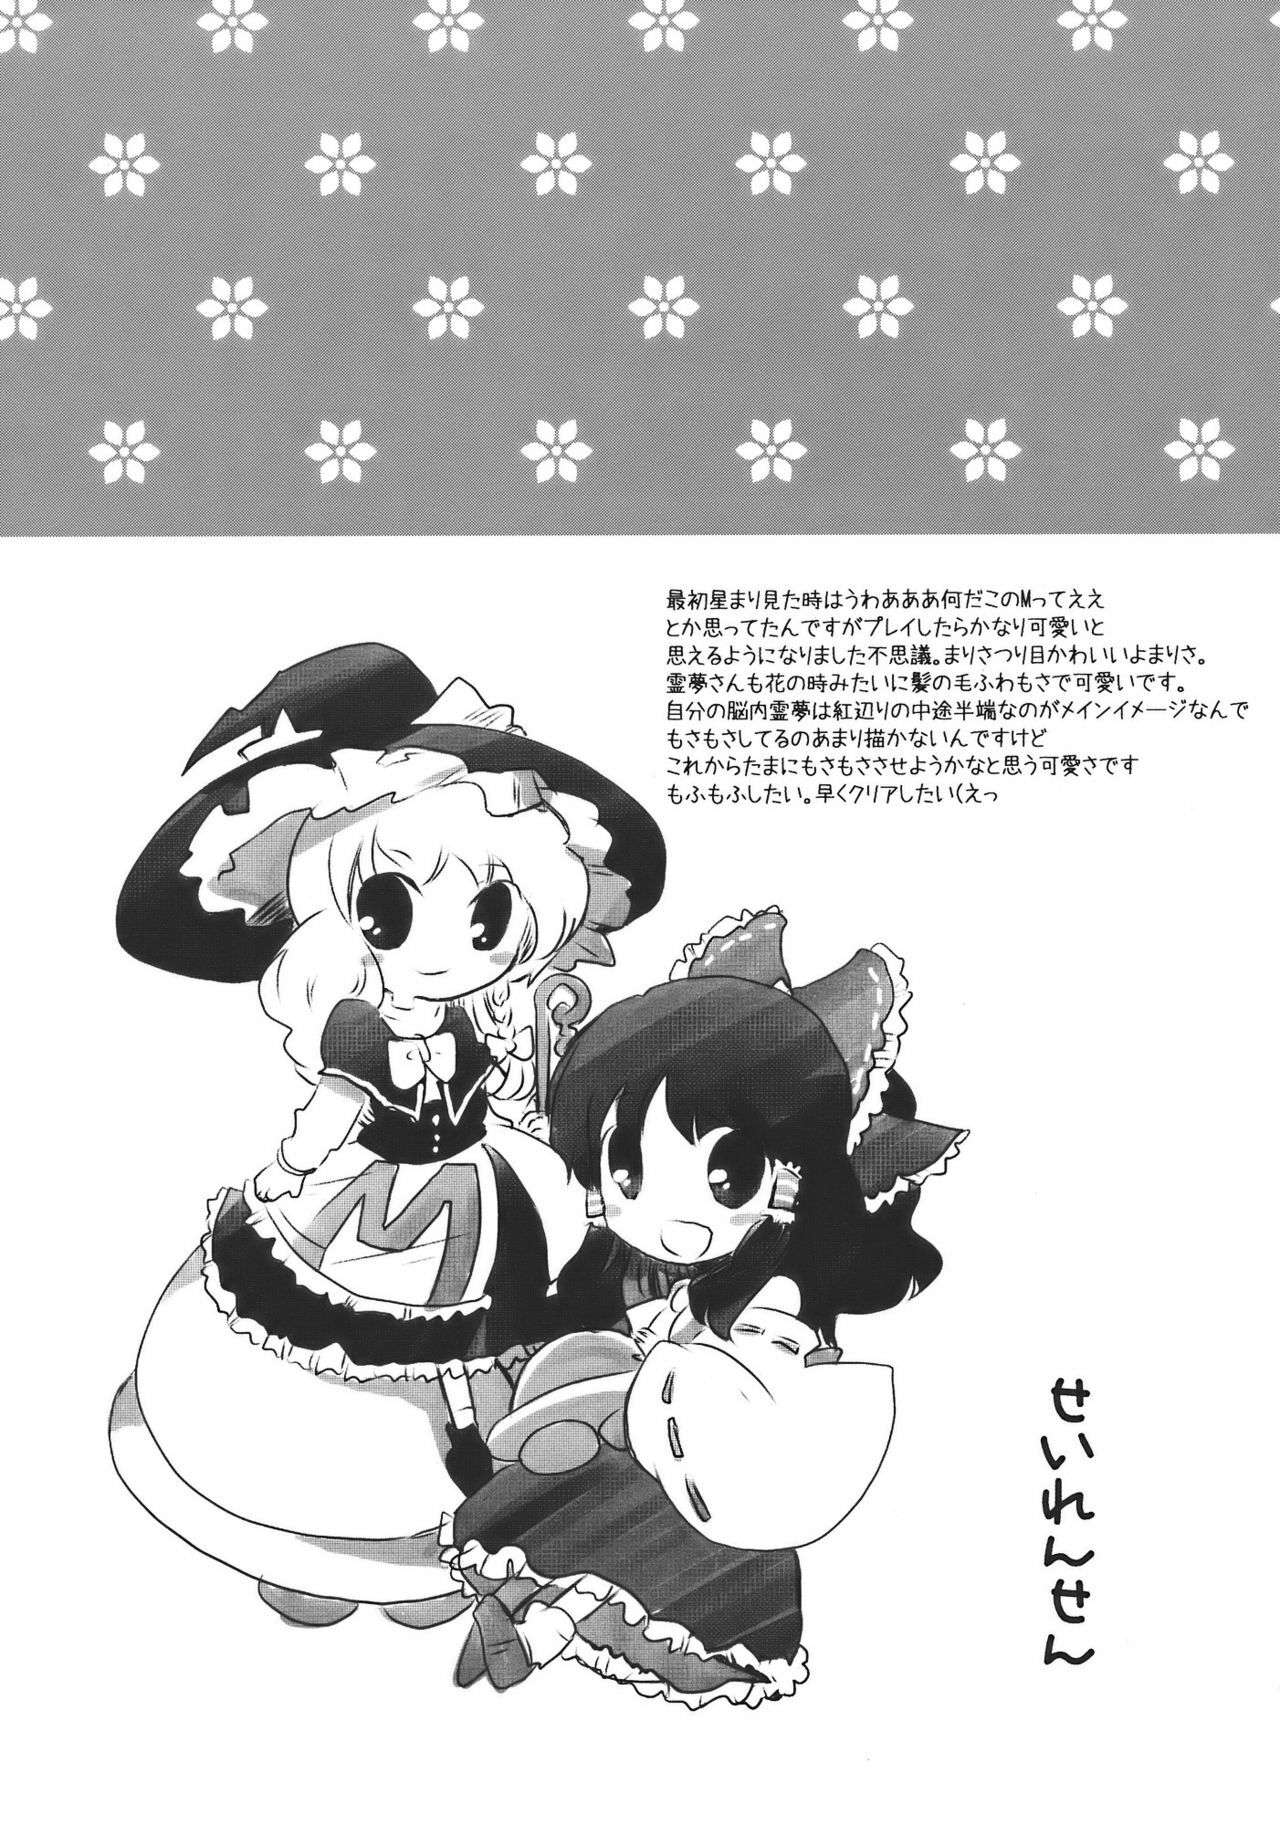 [Oimoto] Yumeiro Dolce (Touhou Project) page 25 full